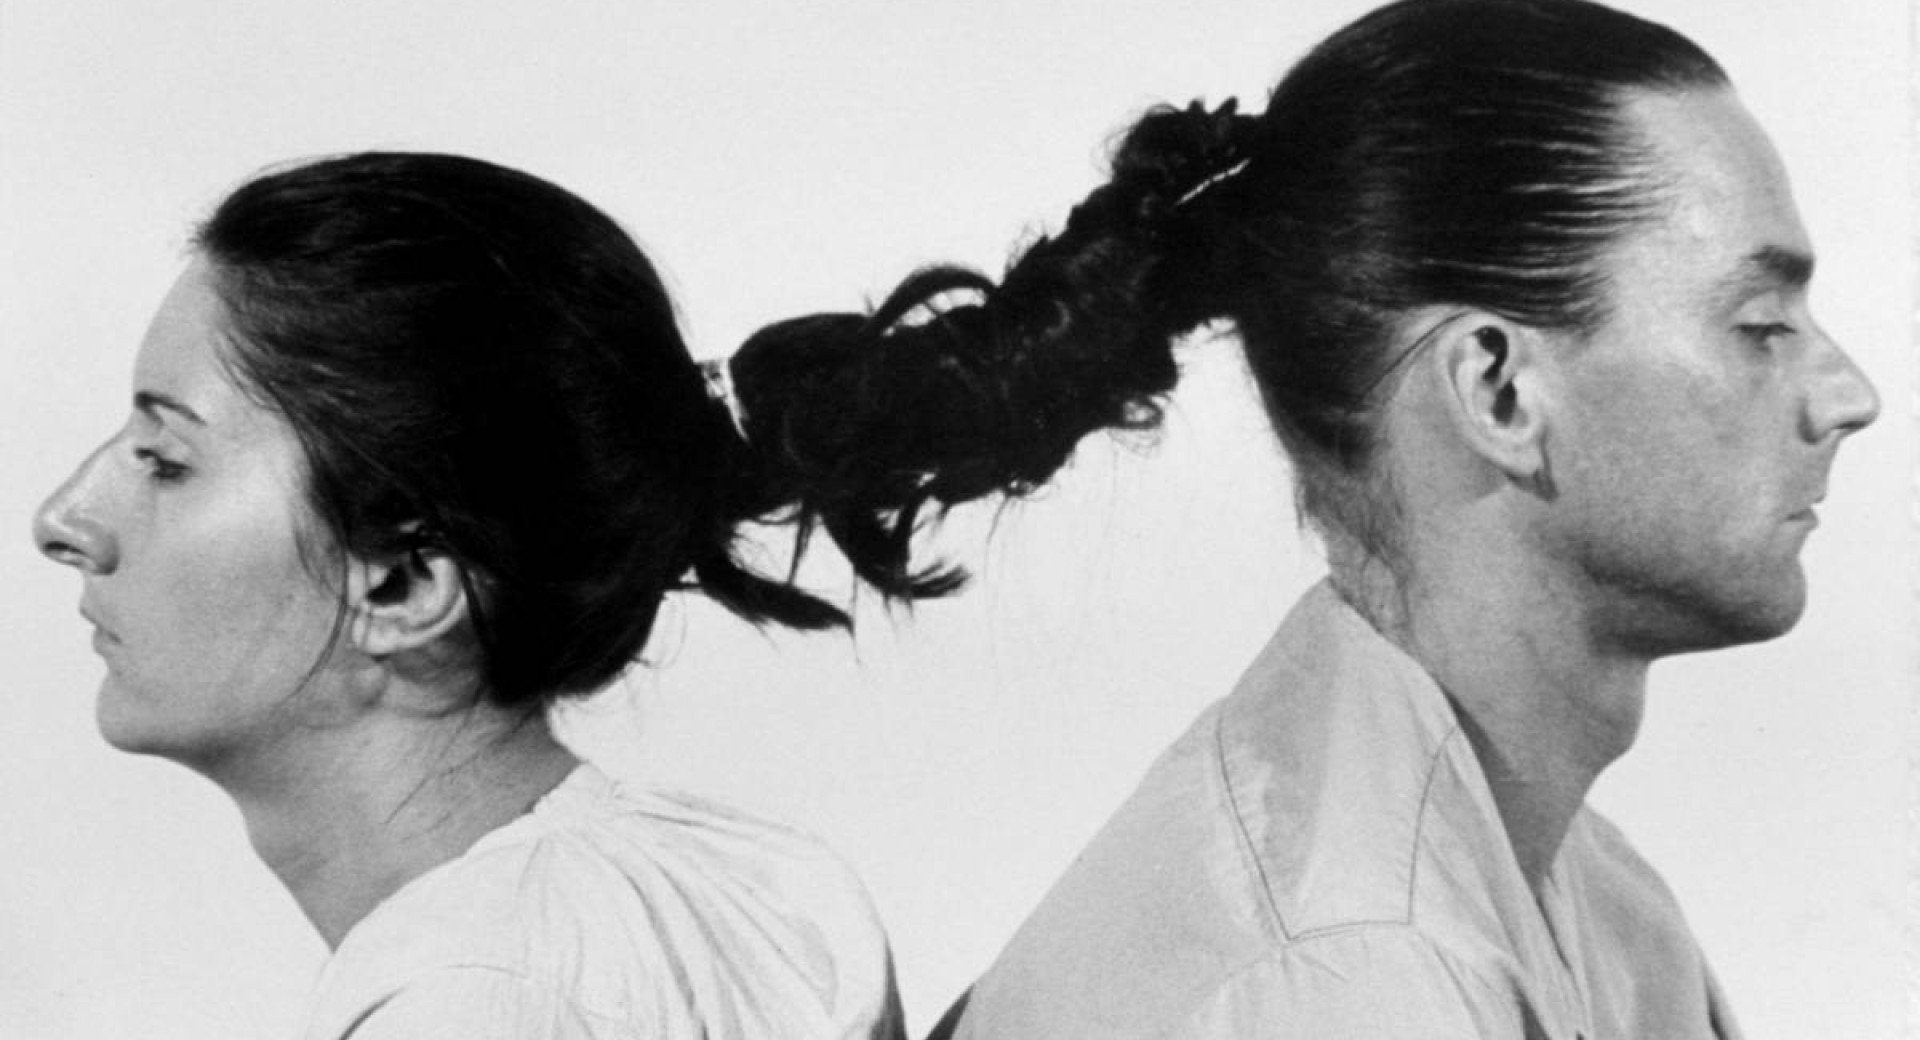 Man and woman photographed from the side with intertwined hair.